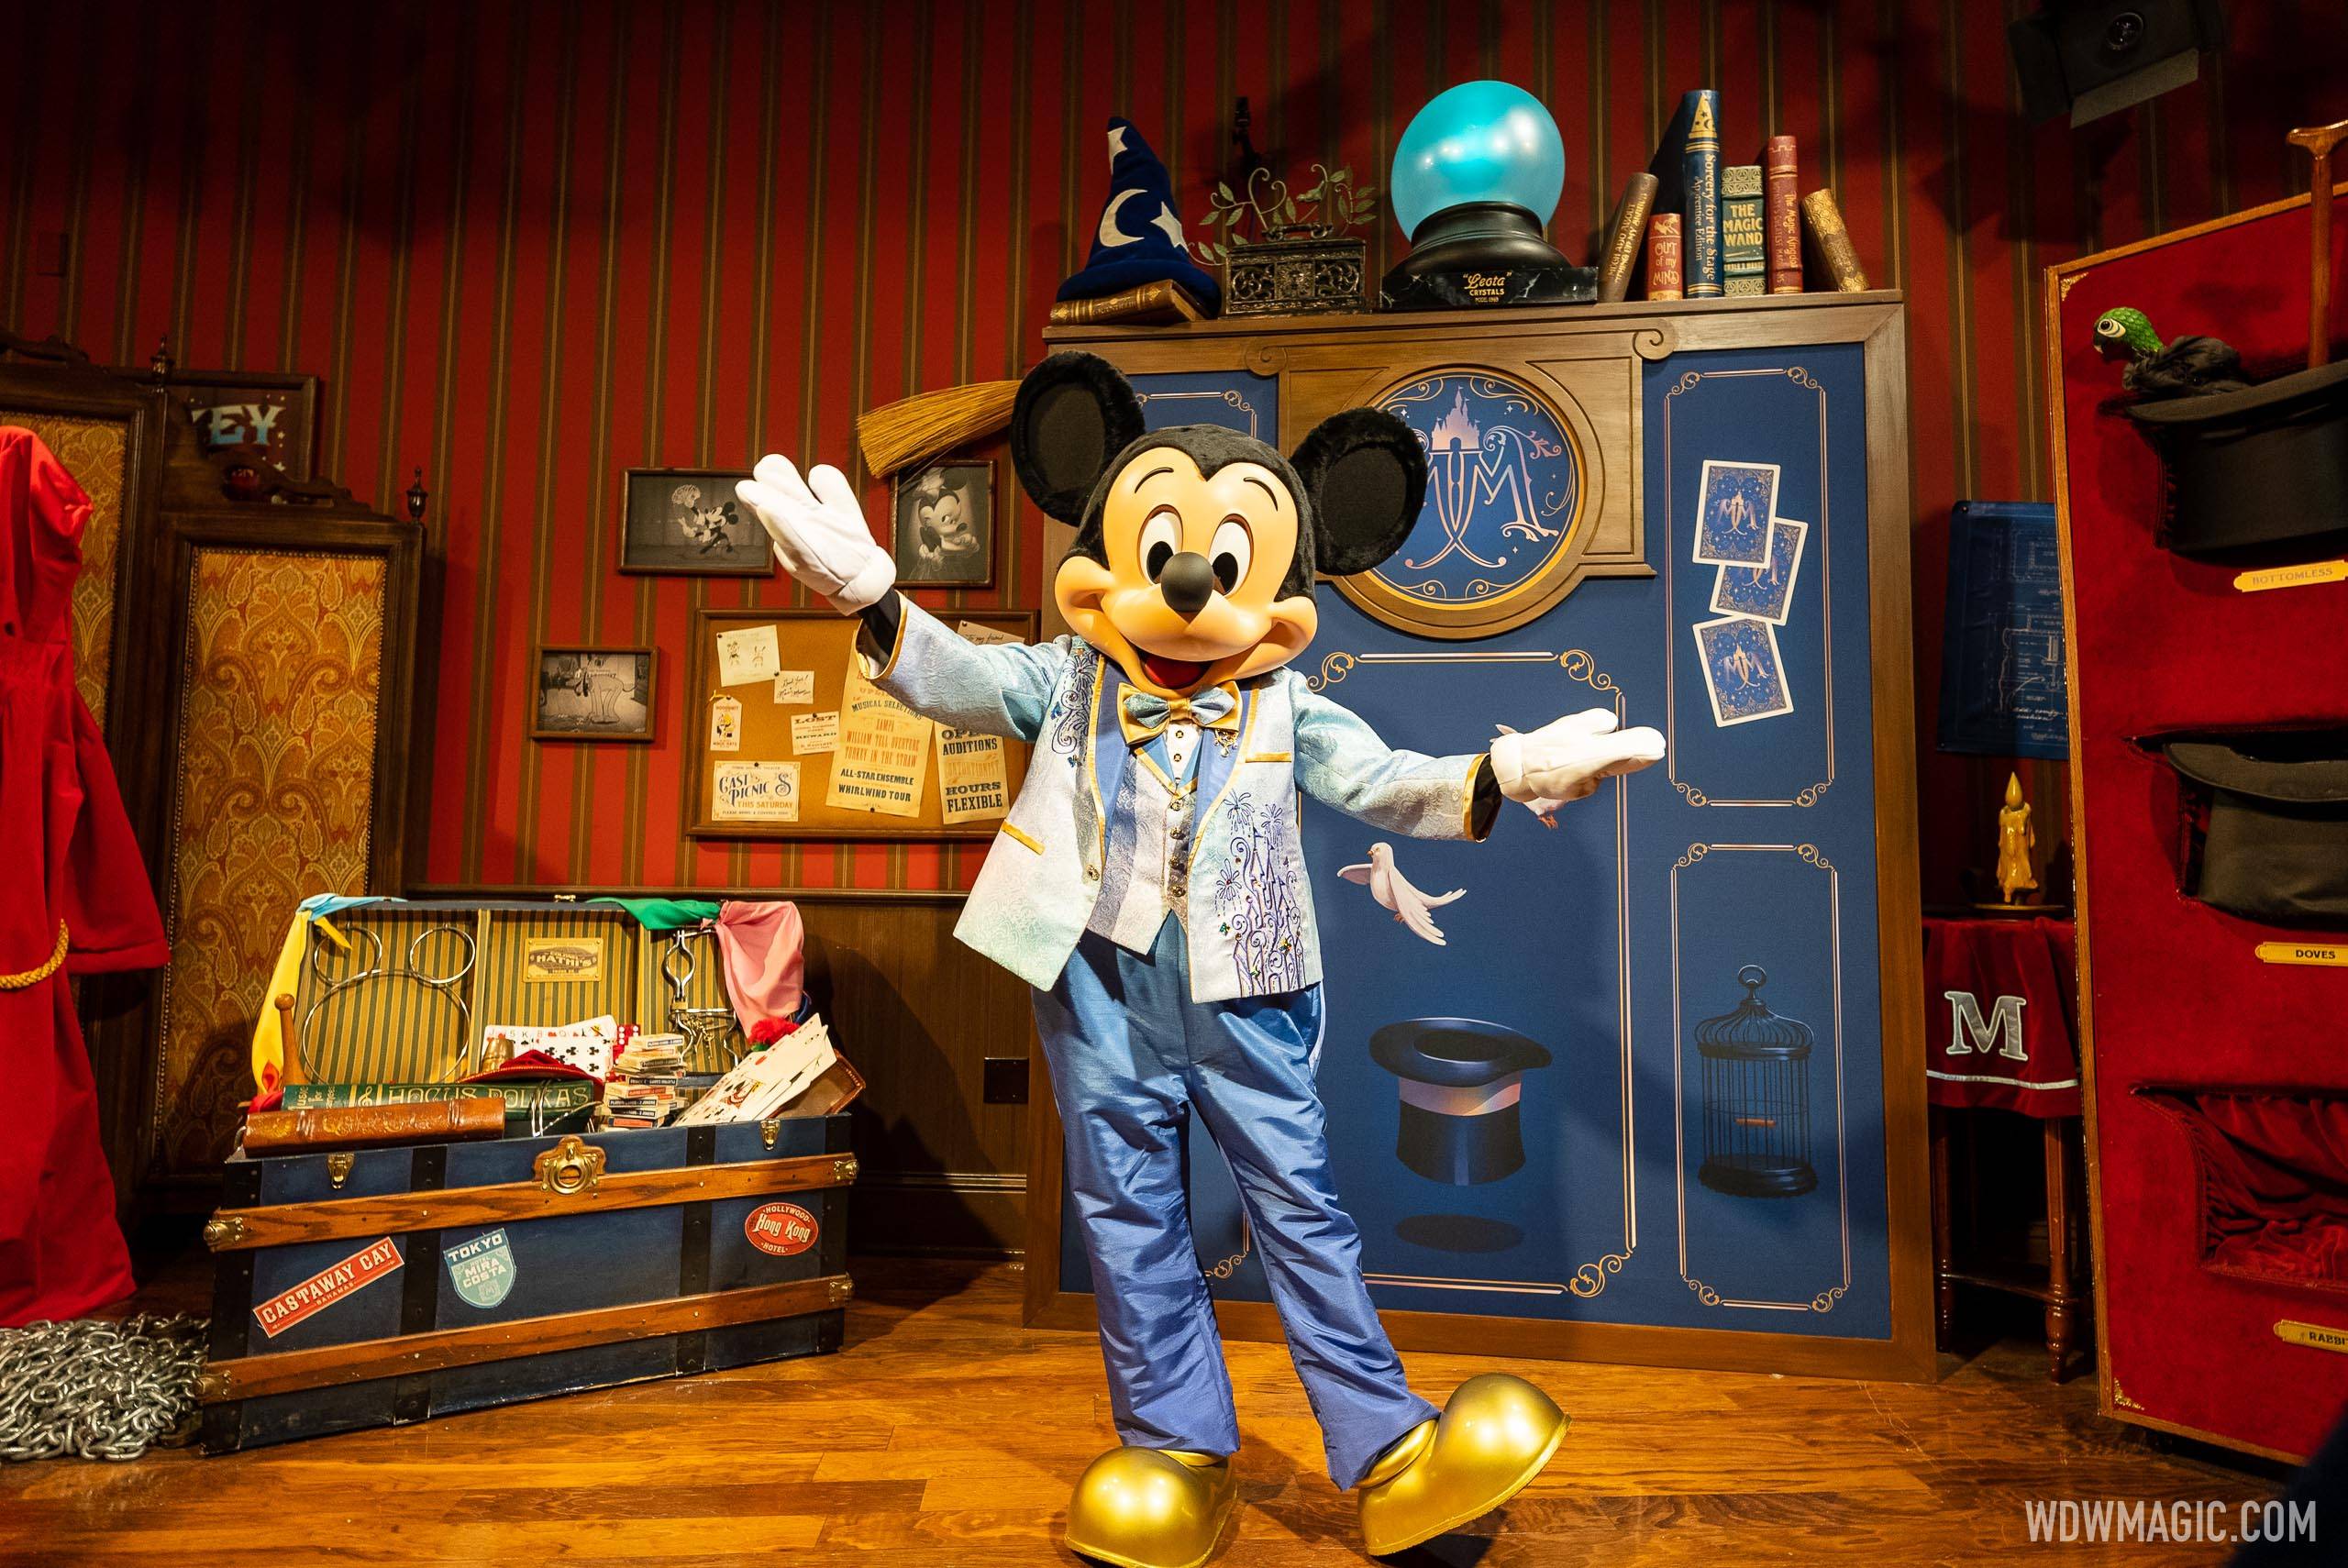 Town Square Theater character meet and greets